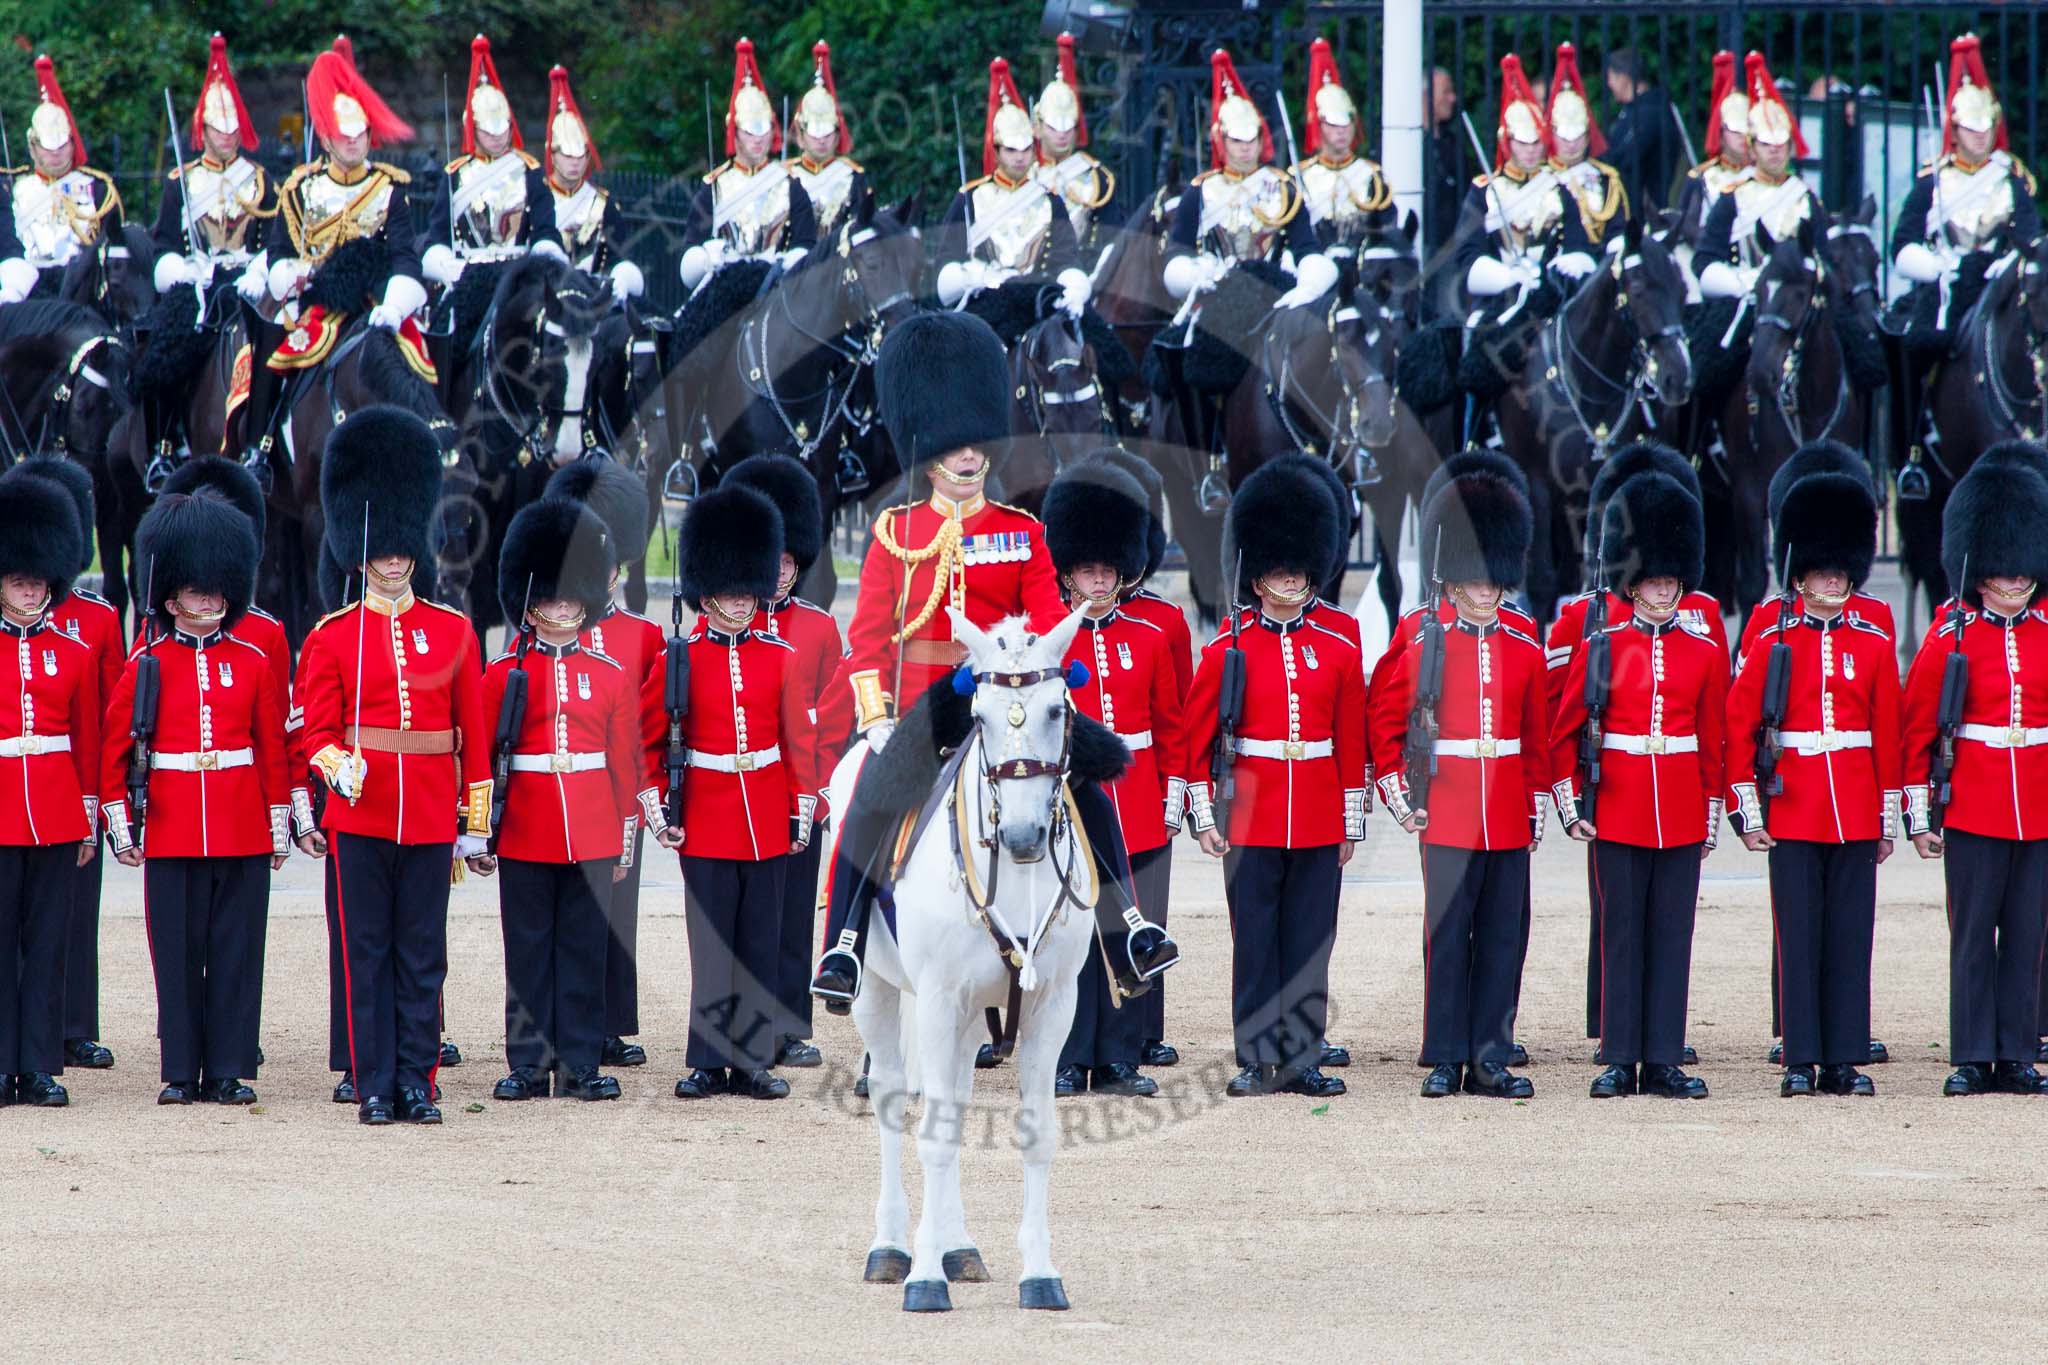 Trooping the Colour 2013: The Field Officer in Brigade Waiting, Lieutenant Colonel Dino Bossi, Welsh Guards, calls the guards to attention. Image #449, 15 June 2013 11:19 Horse Guards Parade, London, UK